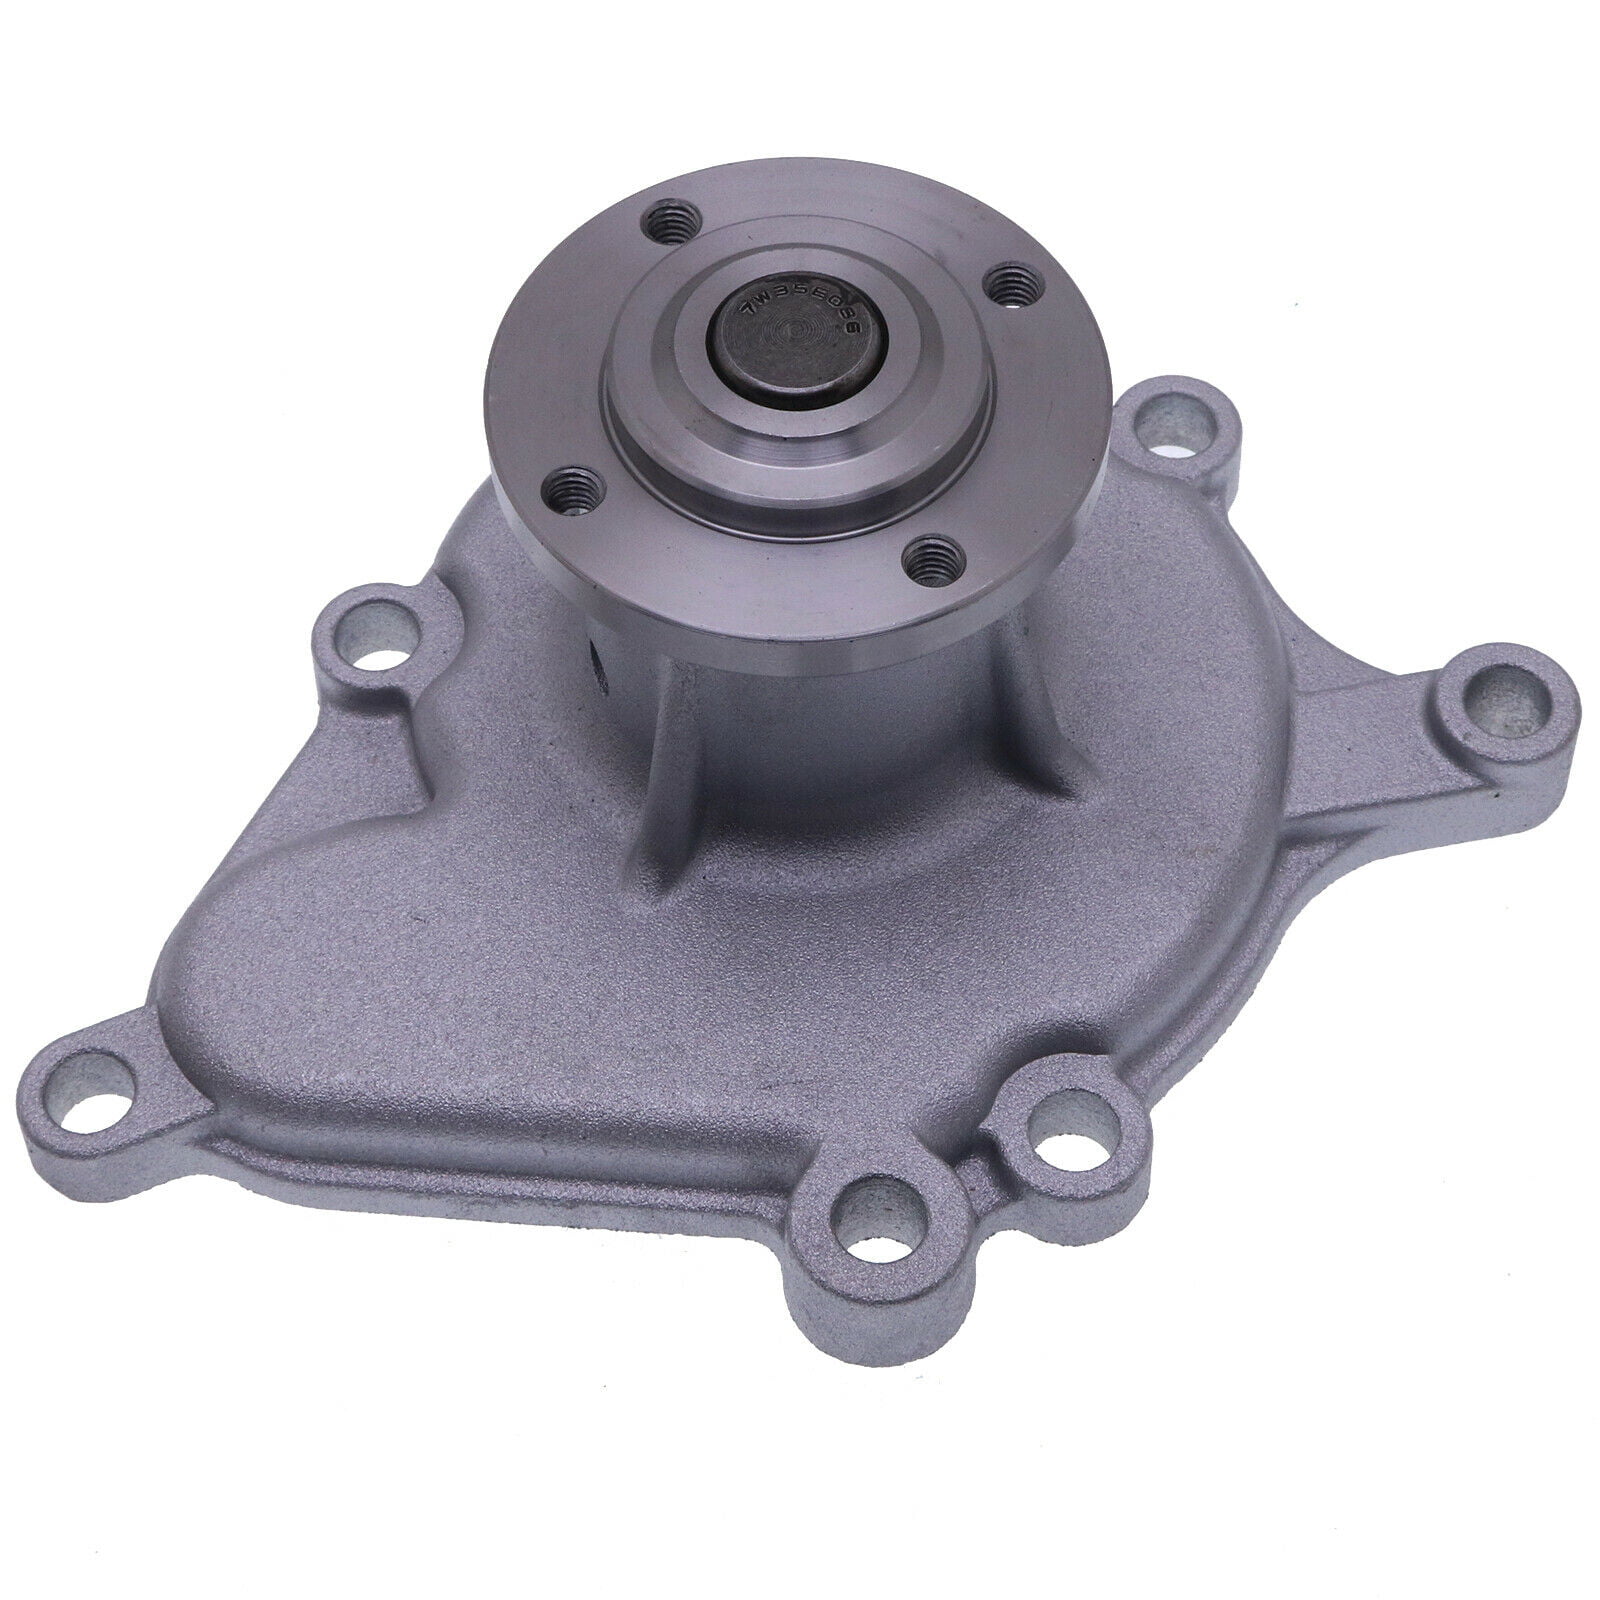 Details about   Water Pump 6513610141-20 for Bolens Tractor G212 G214 2102 2104 Engine 3AF1 1pc